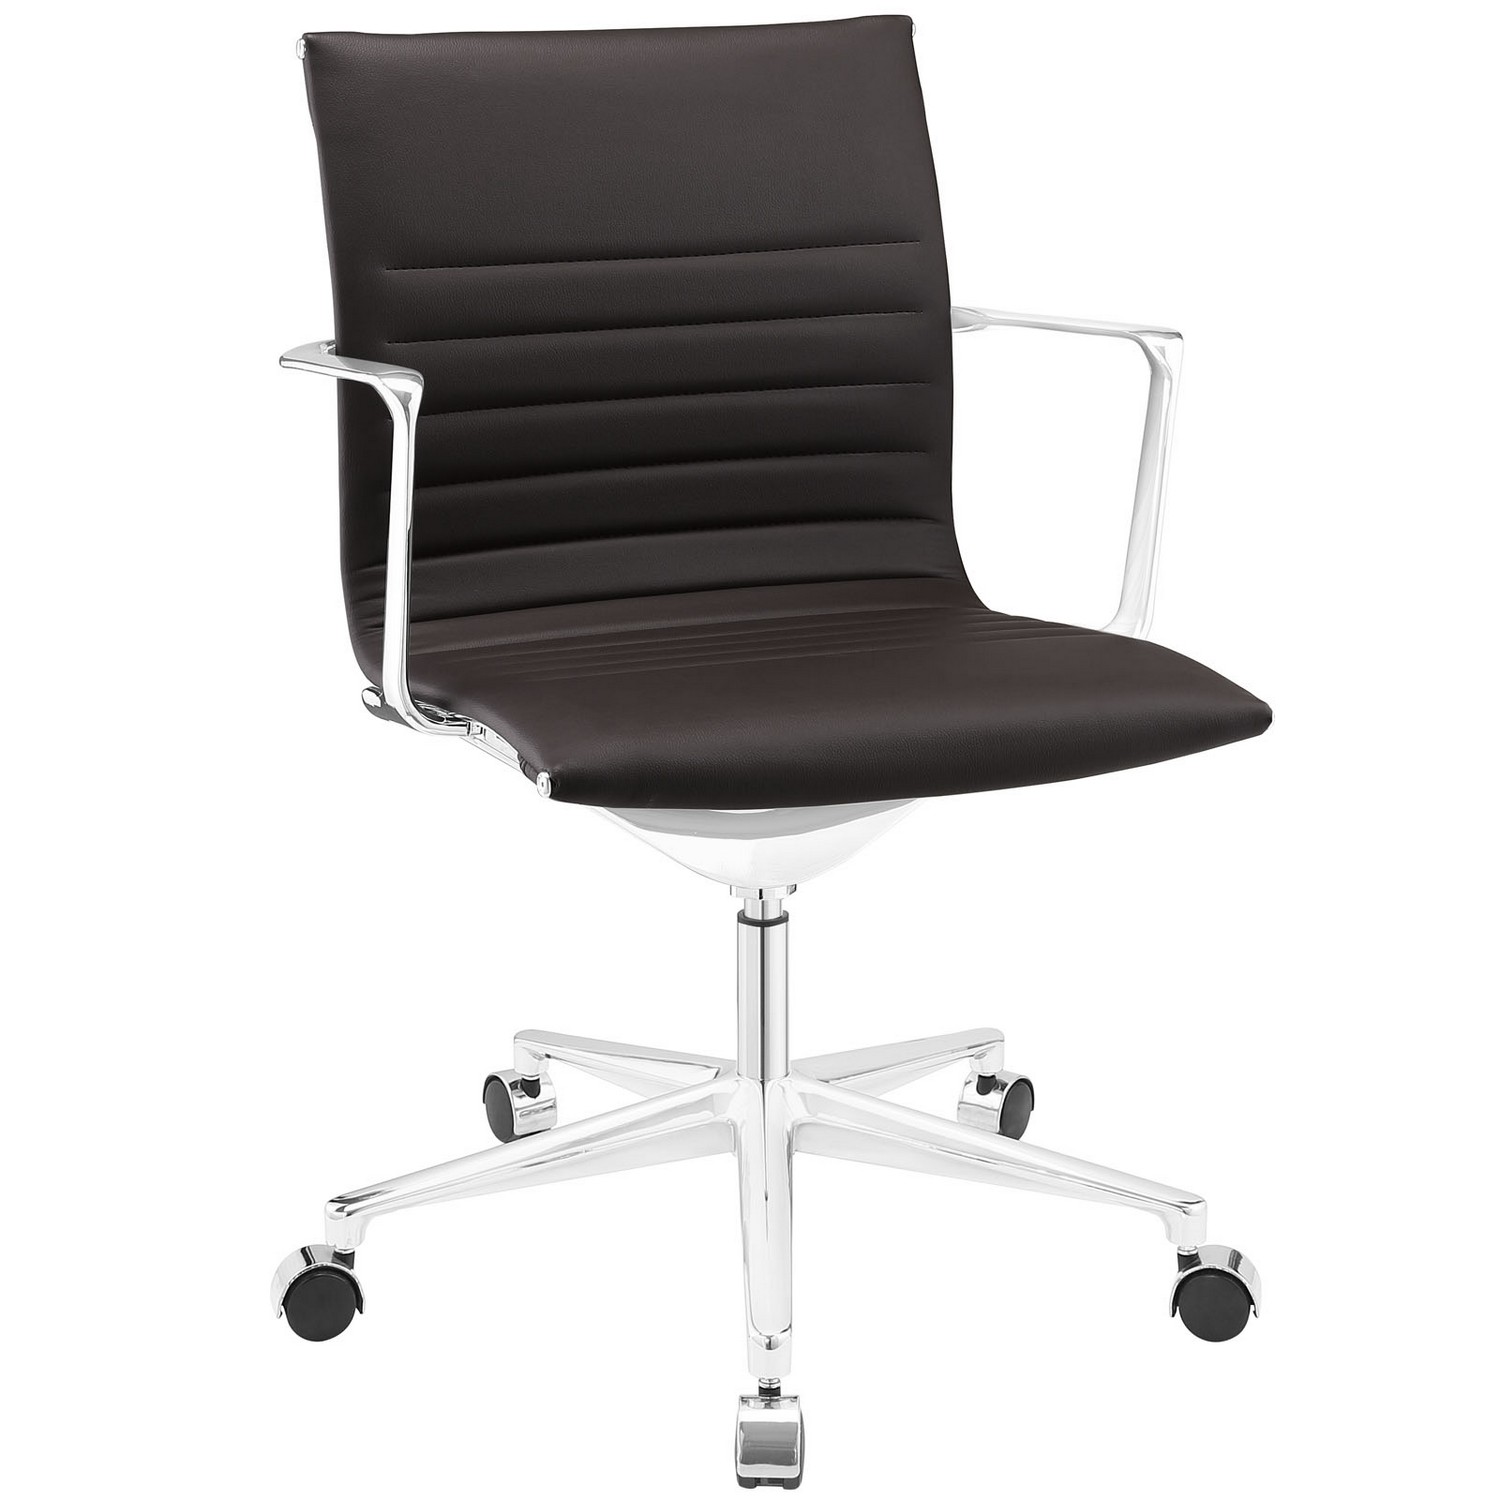 Modway Vi Mid Back Office Chair - Brown